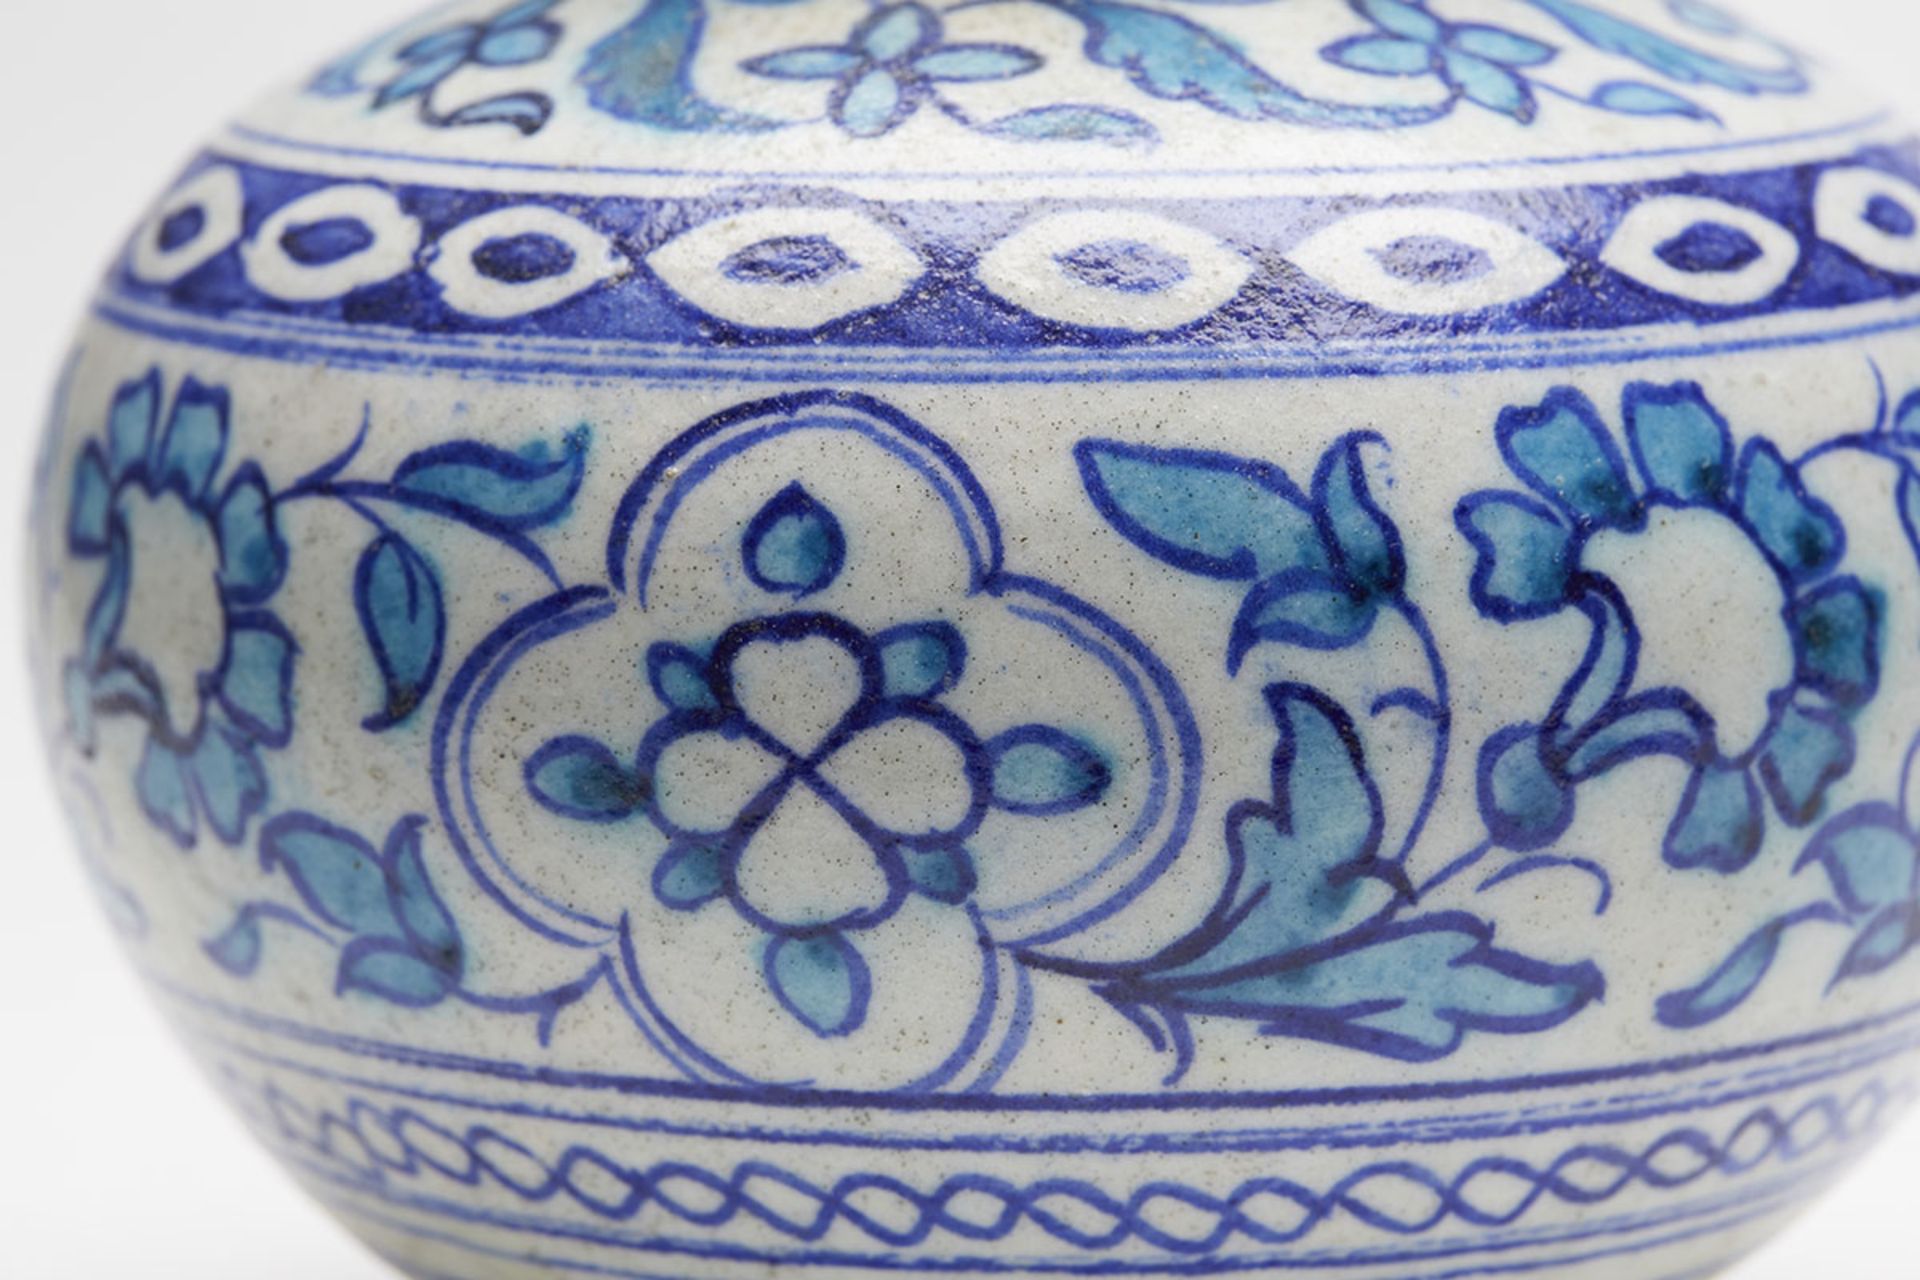 ANTIQUE MIDDLE EASTERN/INDIAN BLUE & WHITE VASE 19TH C.   DIMENSIONS   Height 13,5cm, Diameter 14, - Image 8 of 9